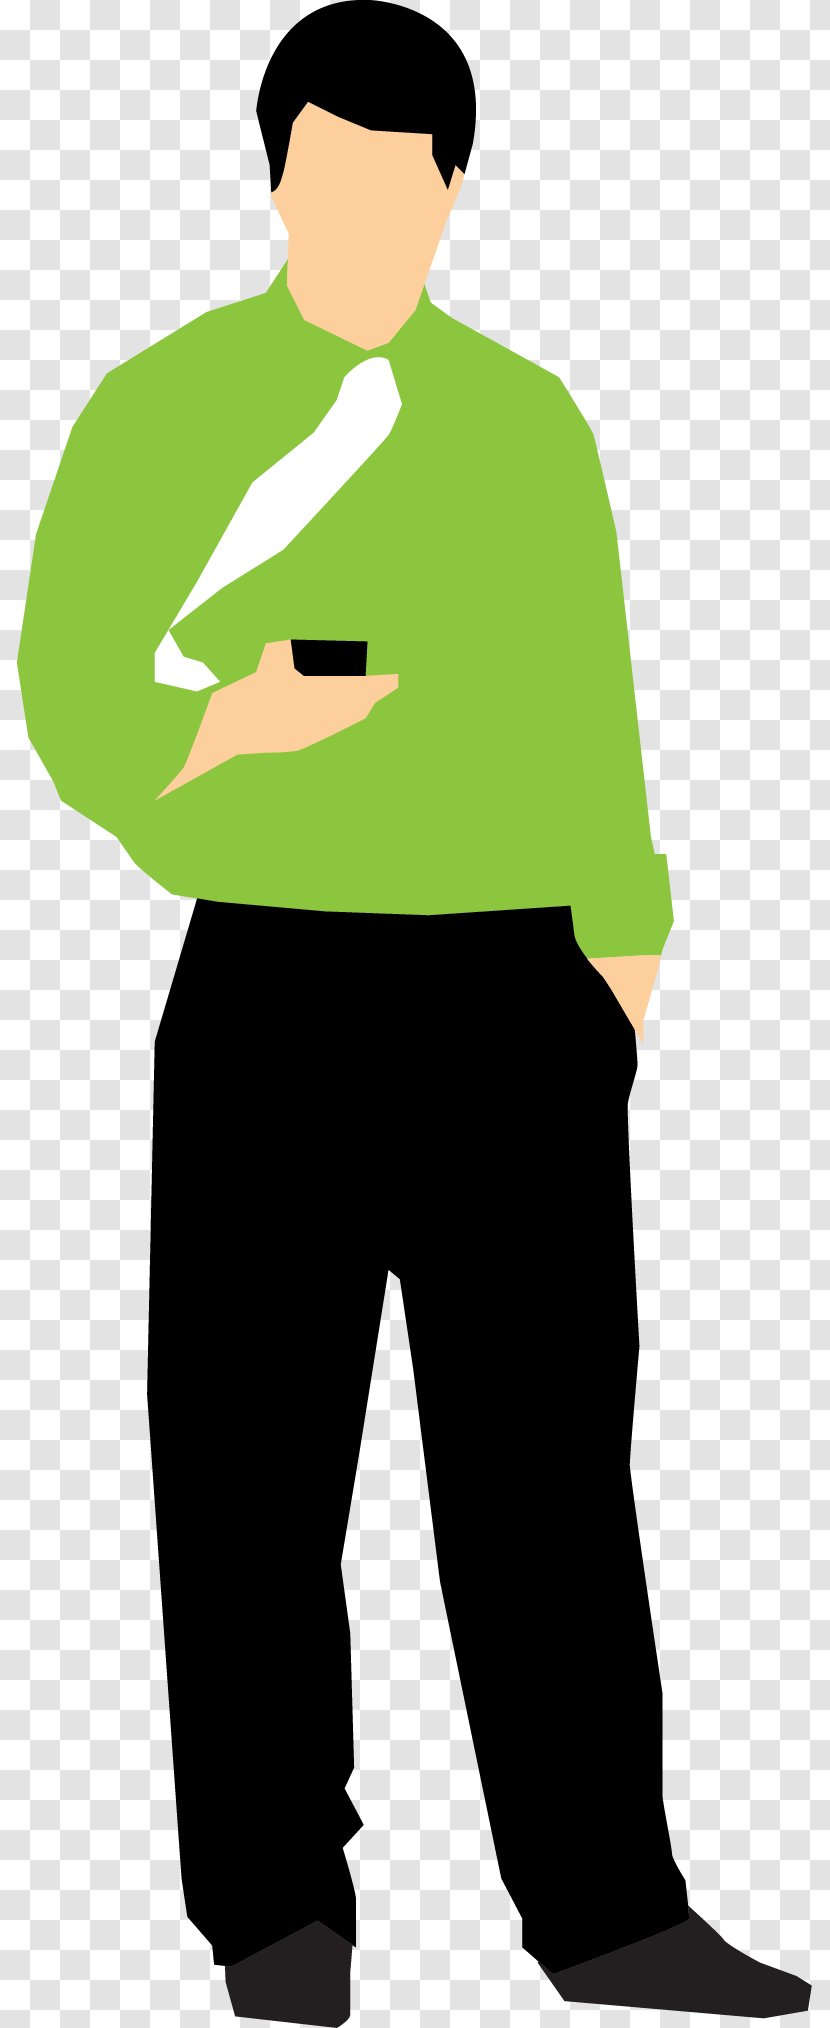 Mobile Phone Telephone - Joint - The Man With Cell Transparent PNG